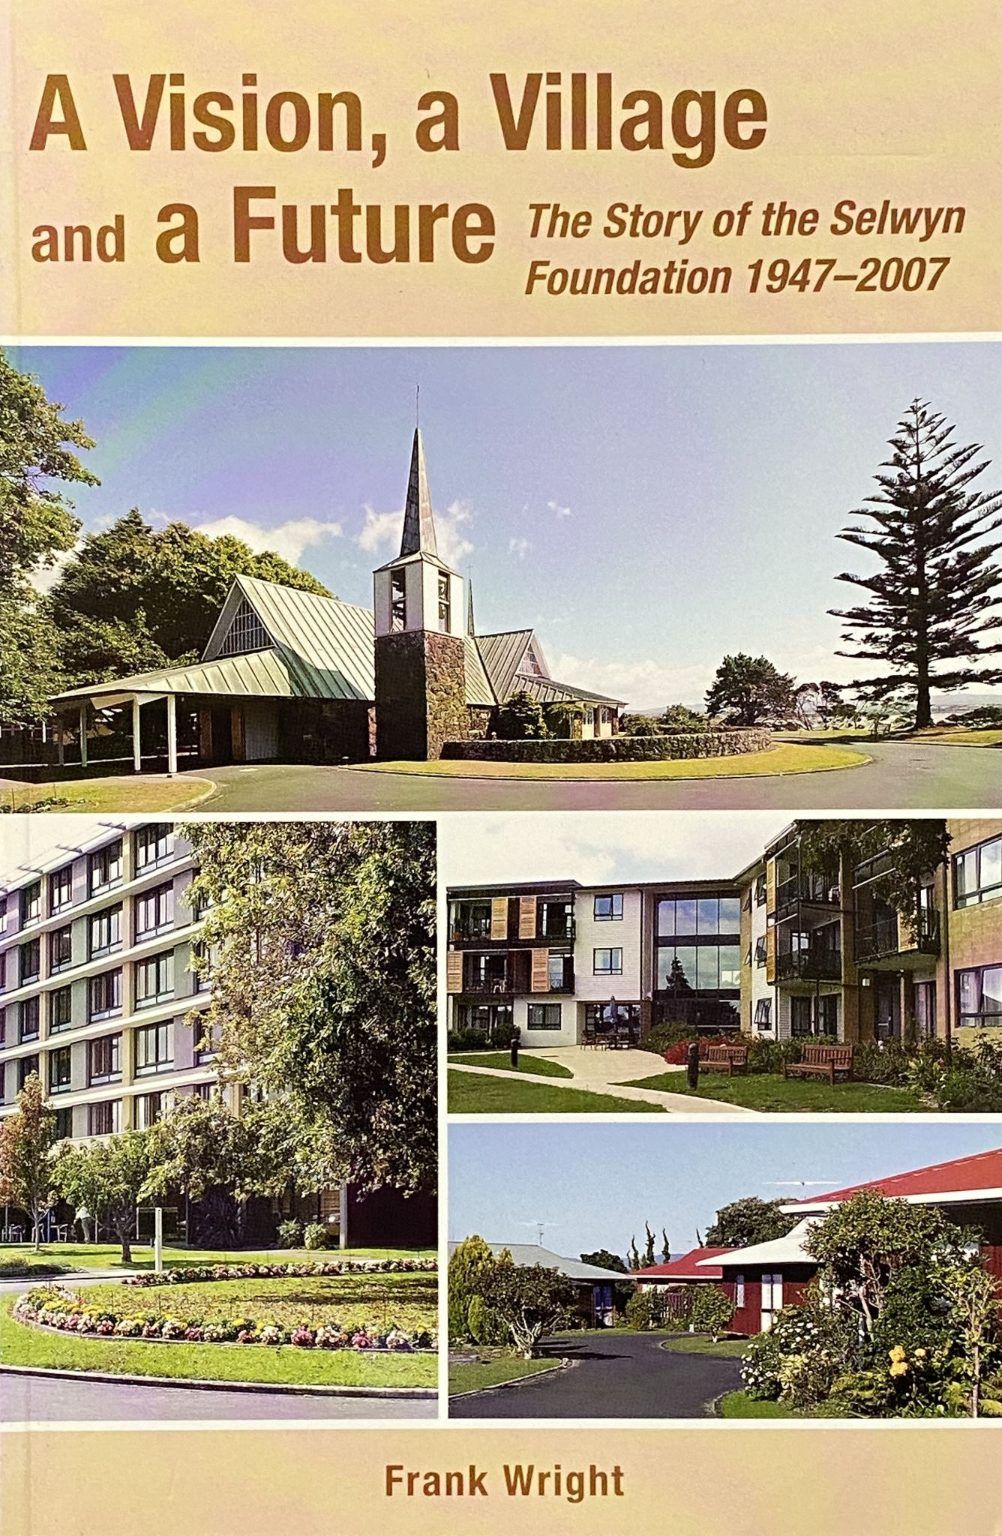 A VISION, A VILLAGE AND A FUTURE: The Story of Selwyn Foundation 1947-2007